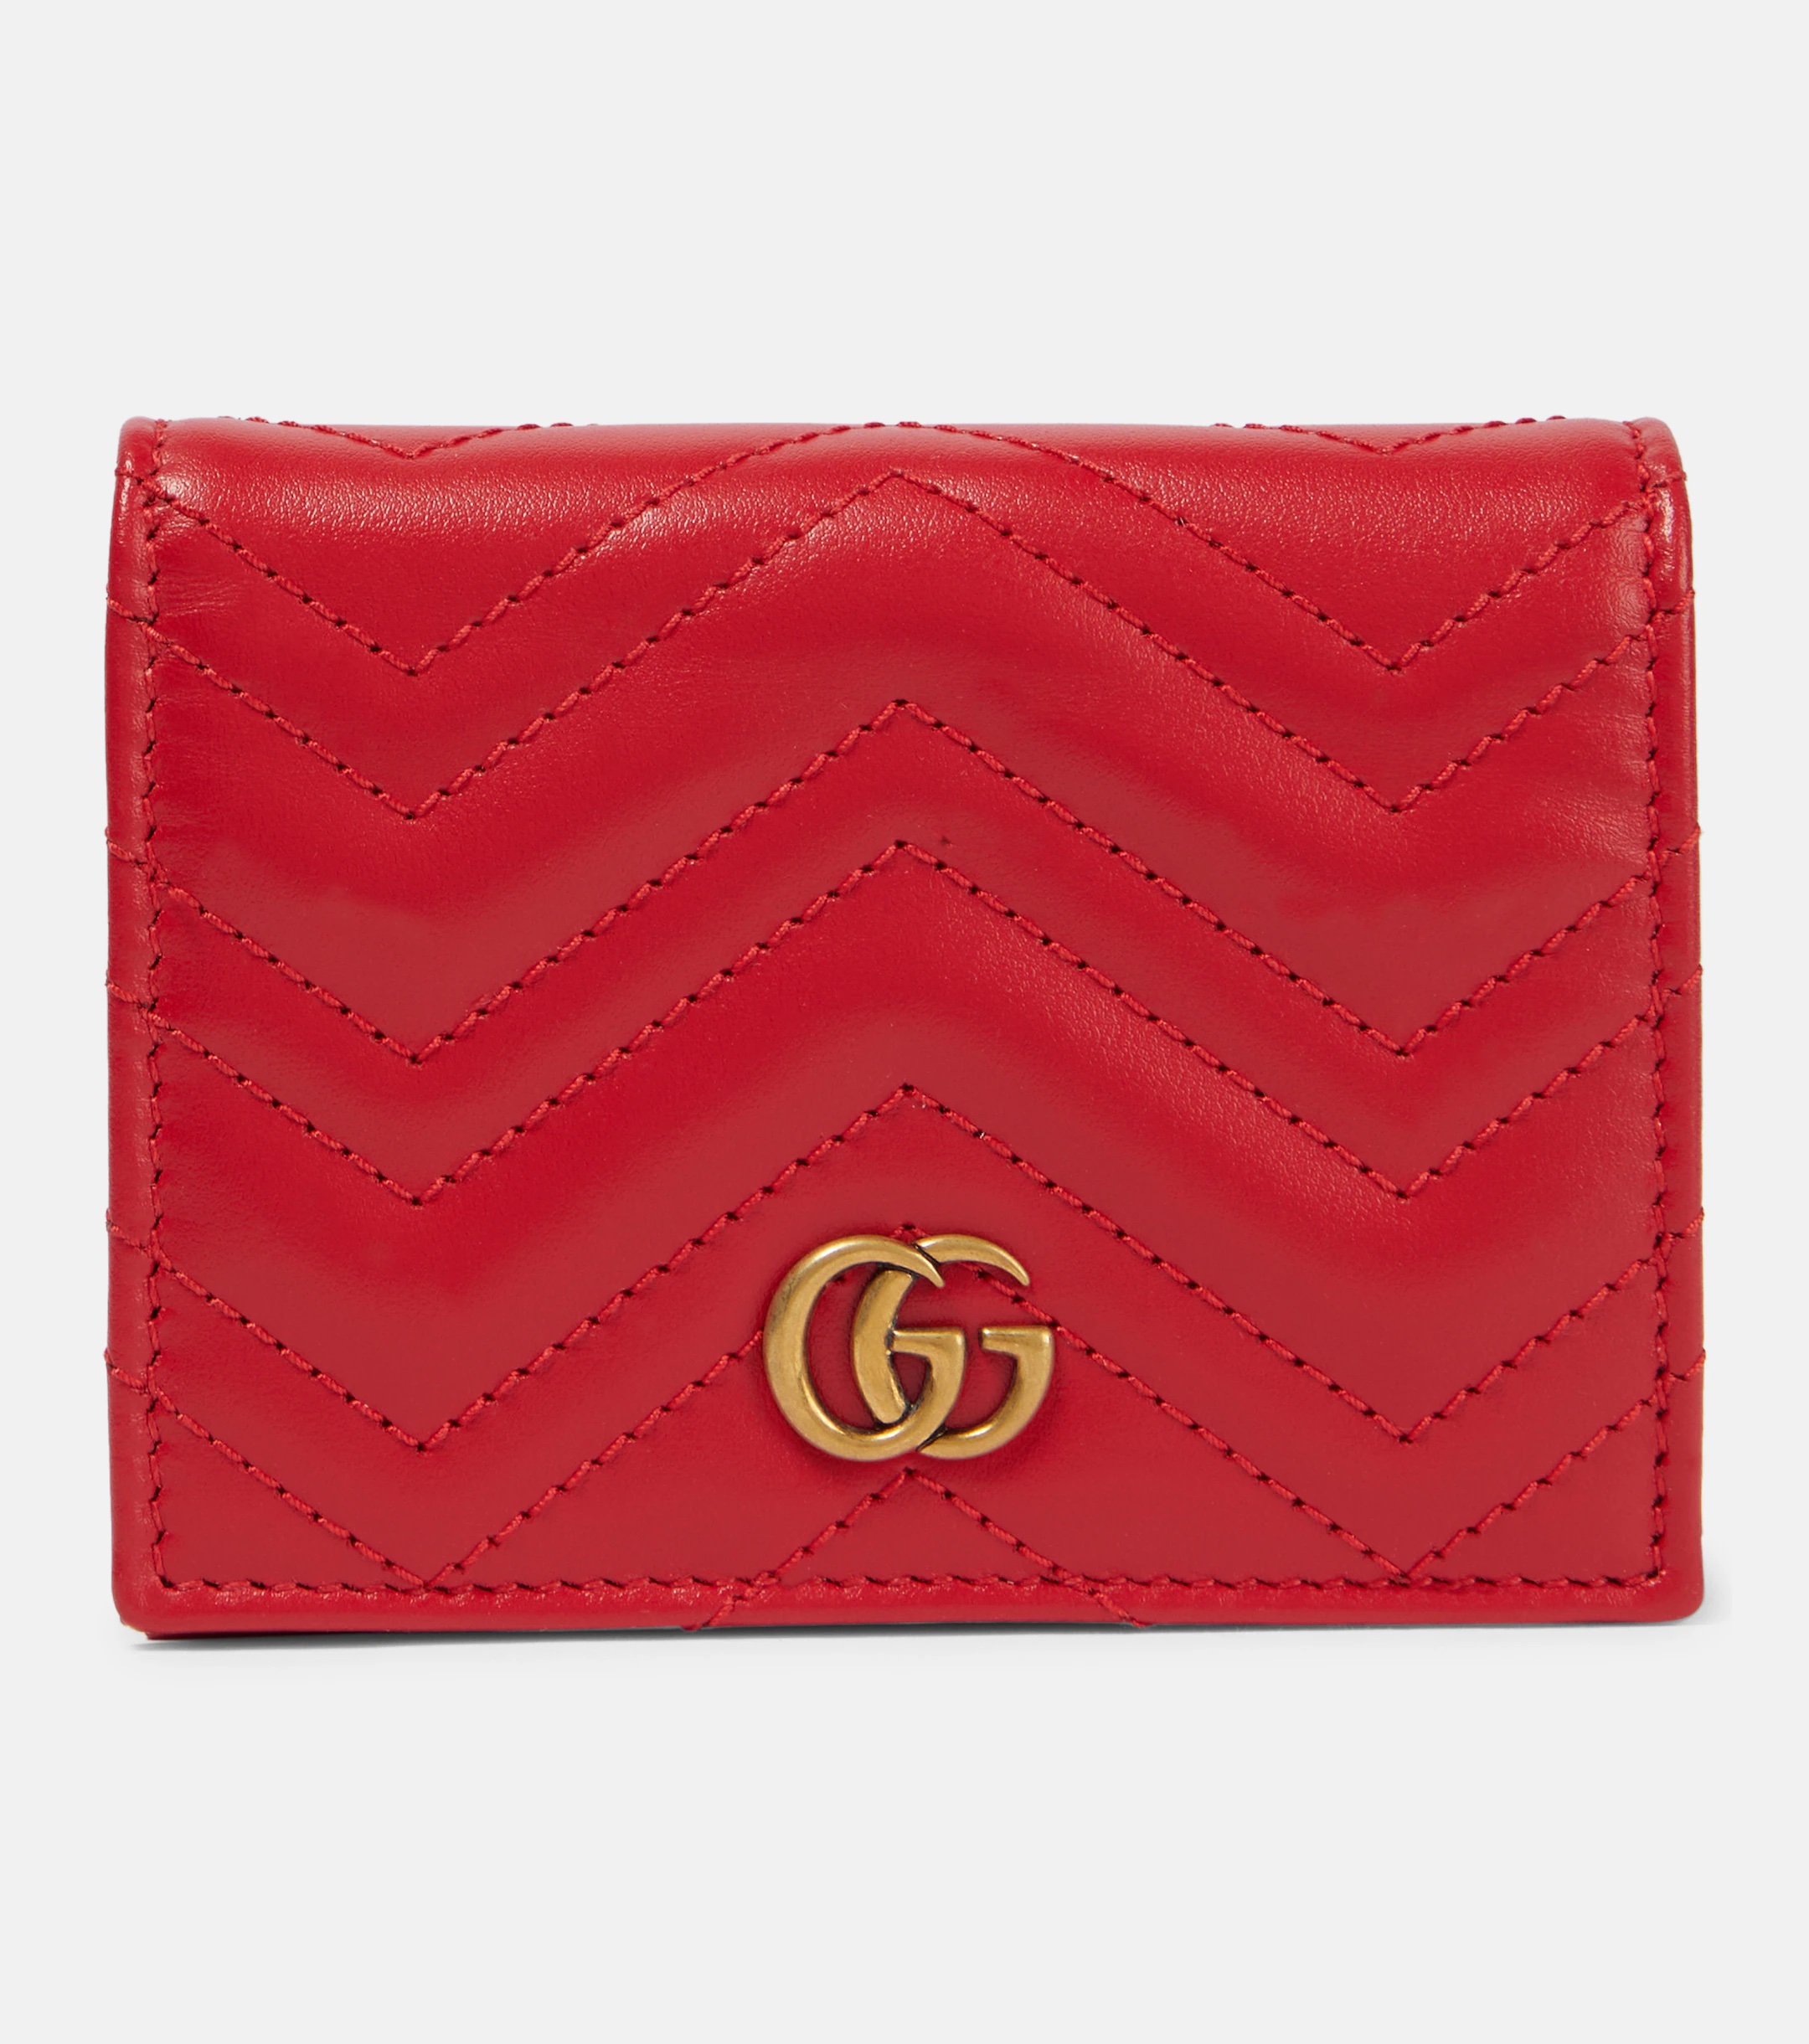 GUCCI GG Marmont leather card case